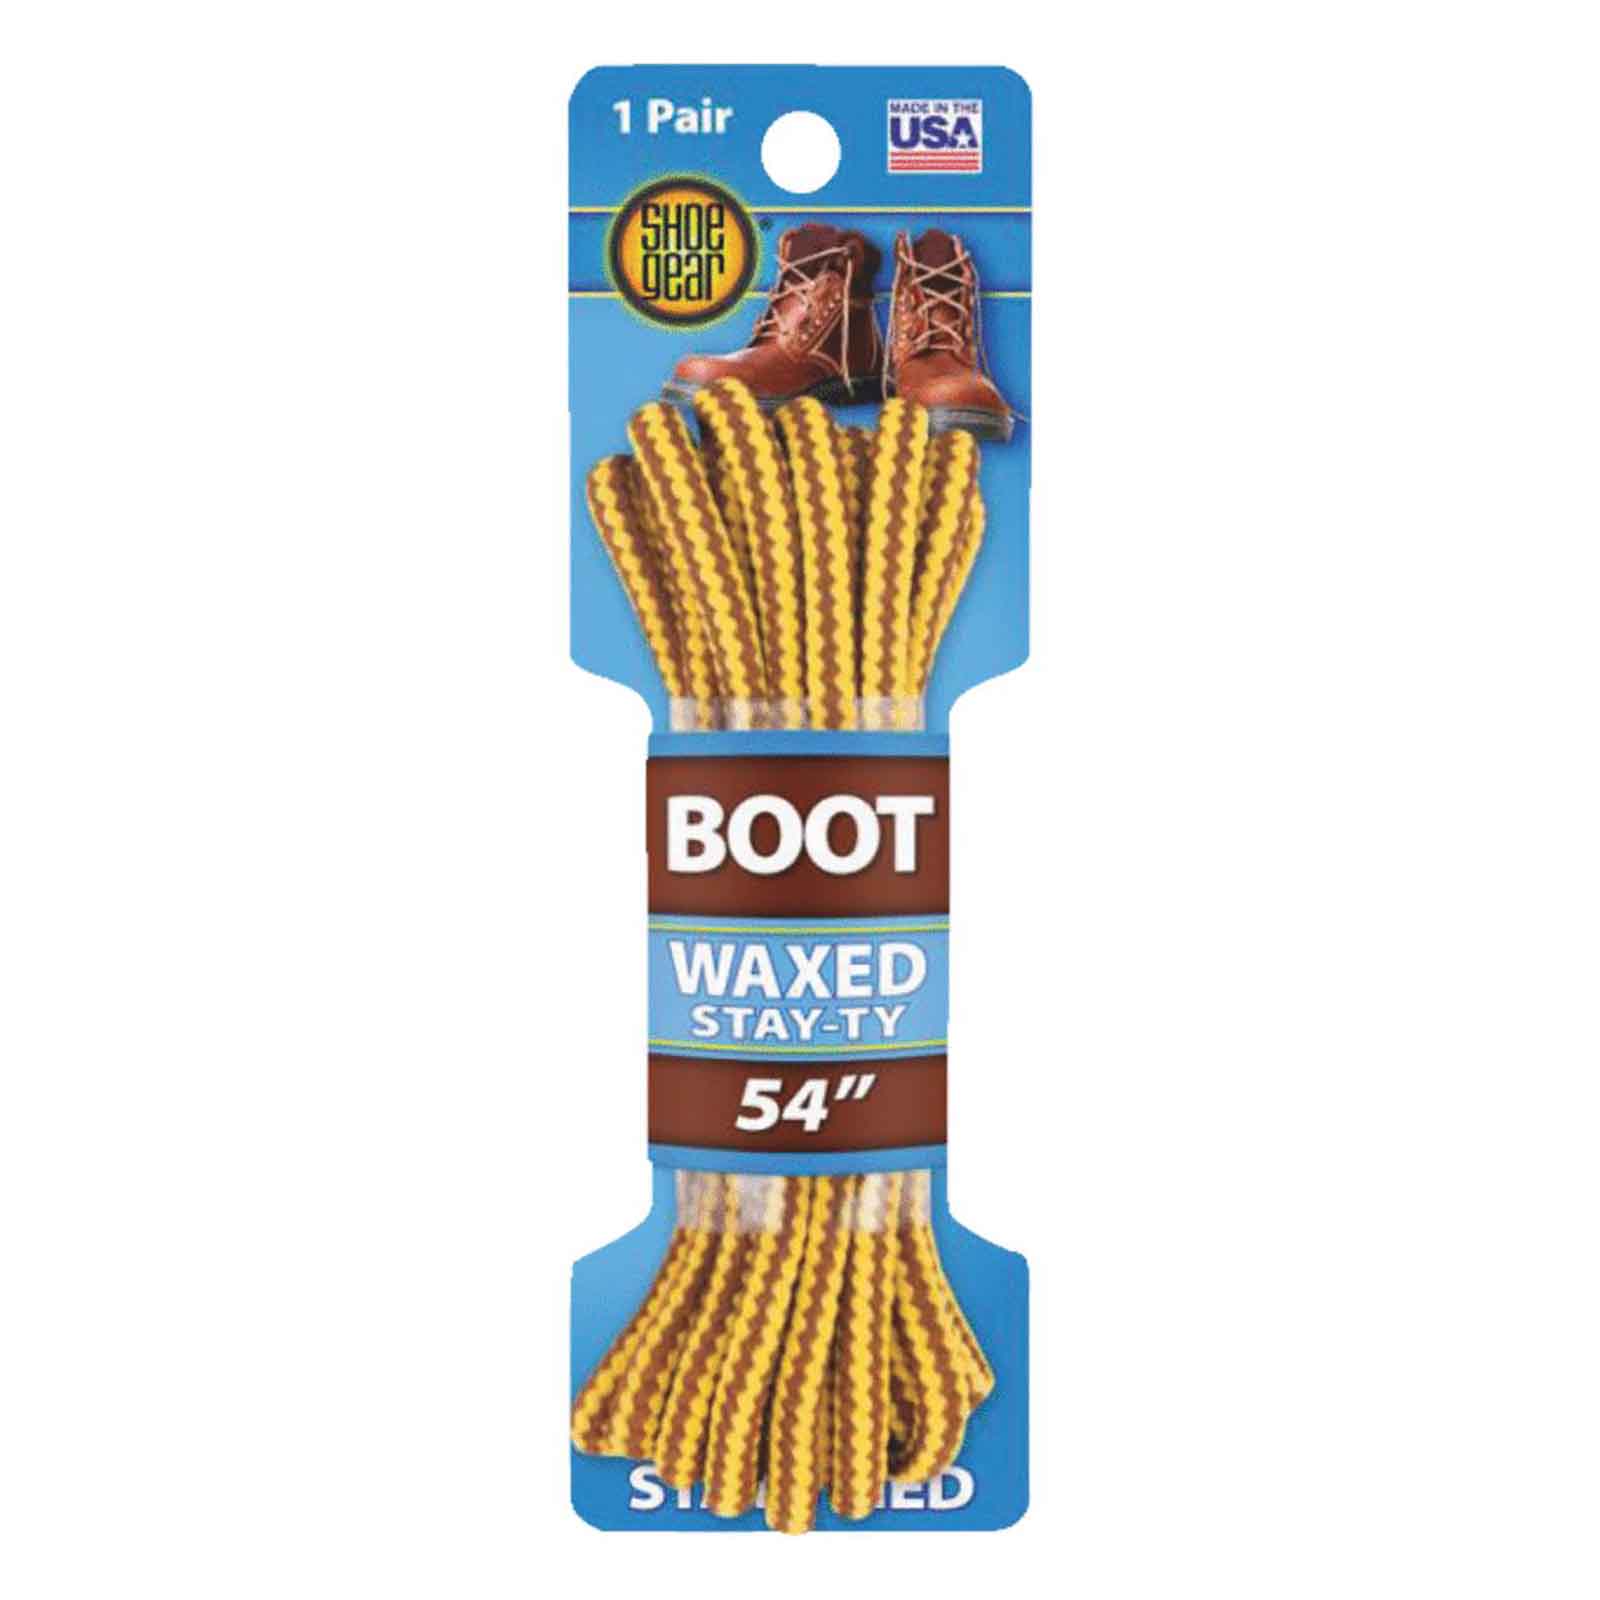 SHOE GEAR Waxed 54" Round Boot Laces